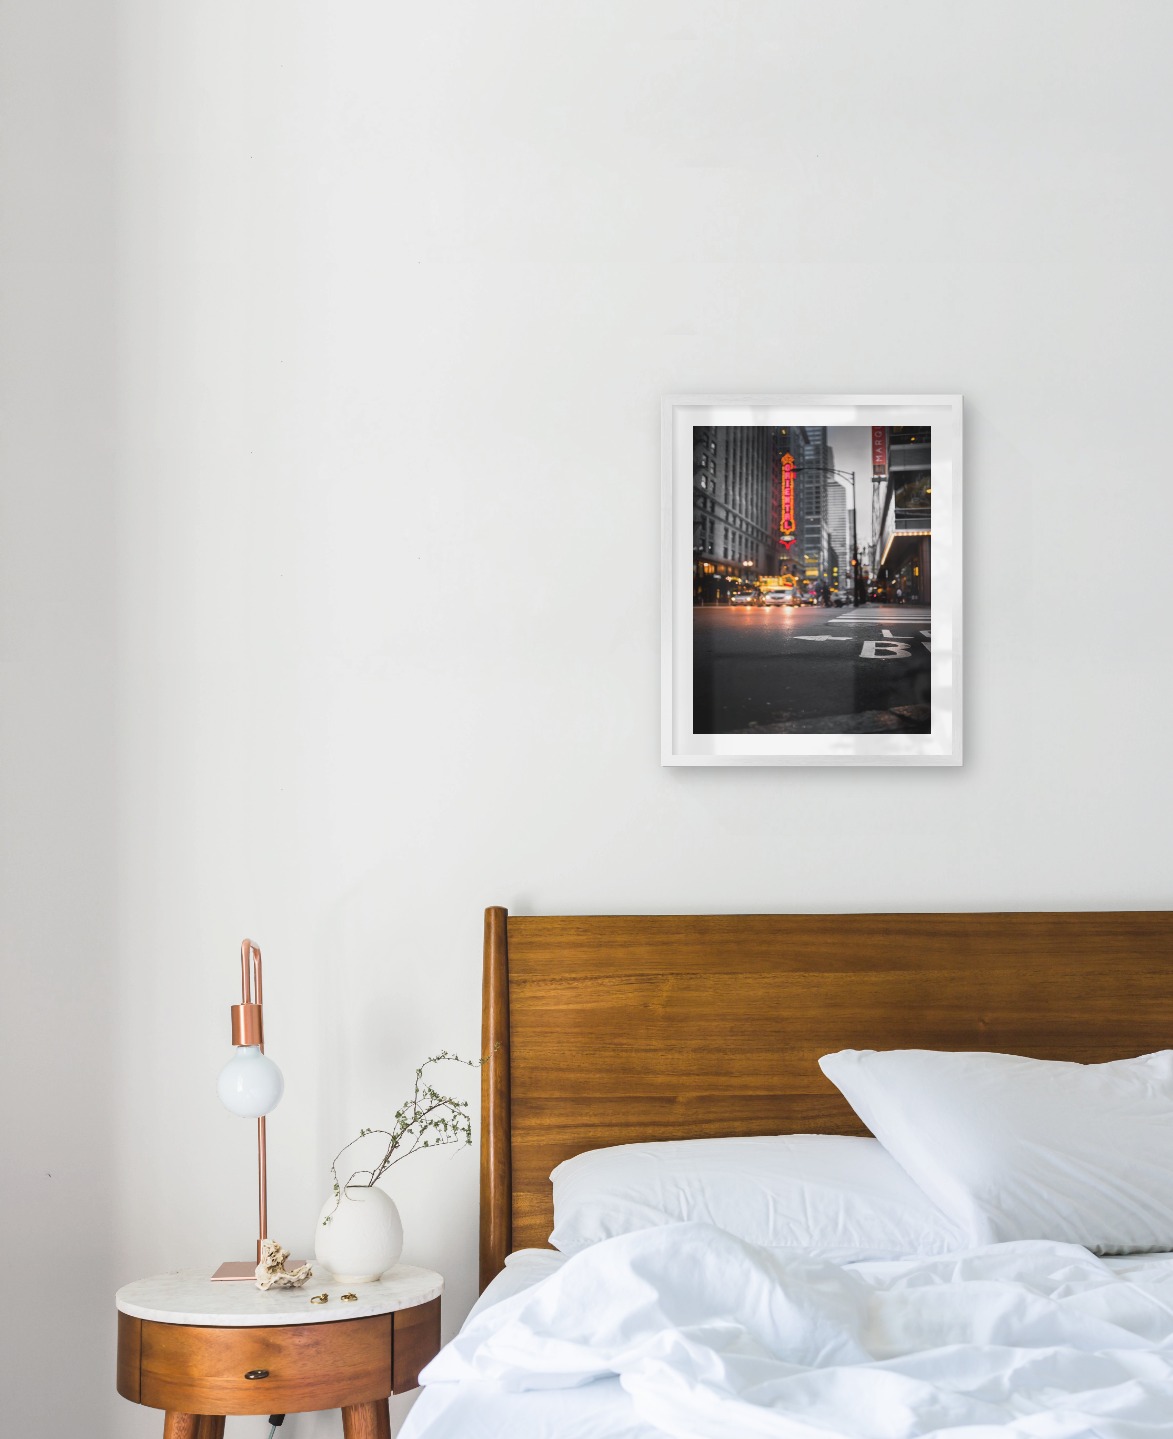 Gallery wall with picture frame in silver in size 40x50 with print "Busy city center"